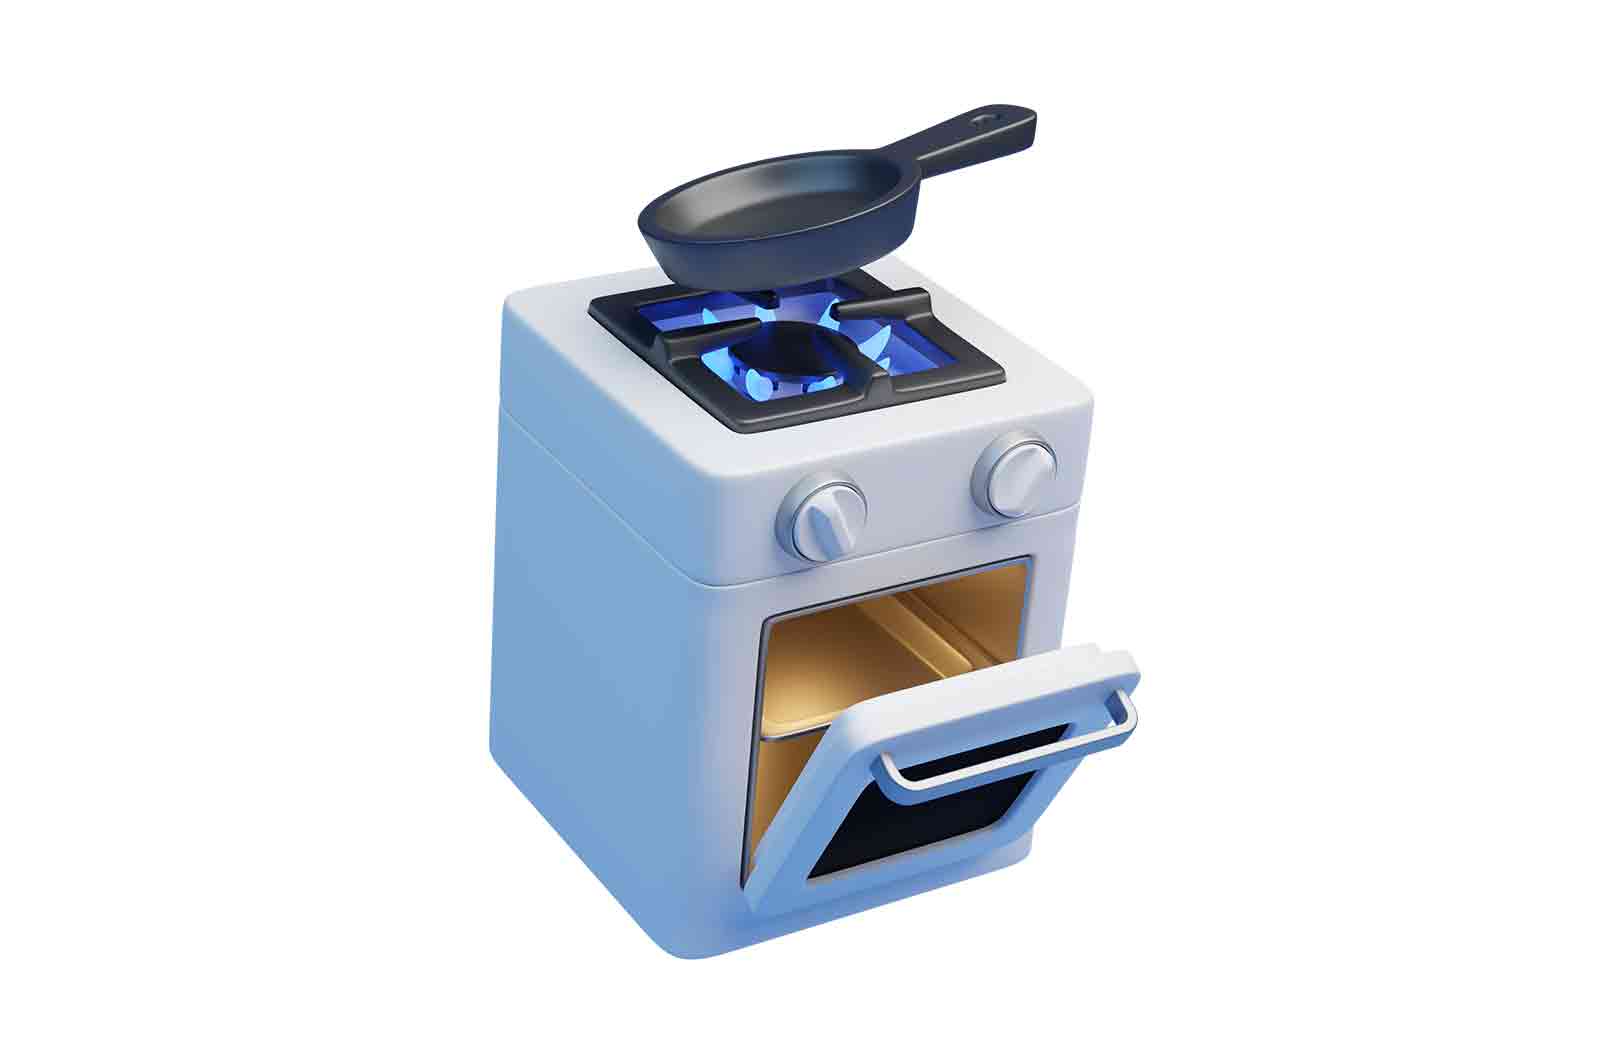 Modern gas stove with blue flame 3d rendered illustration. Stove with open oven. Kitchen equipment or appliance for cooking food